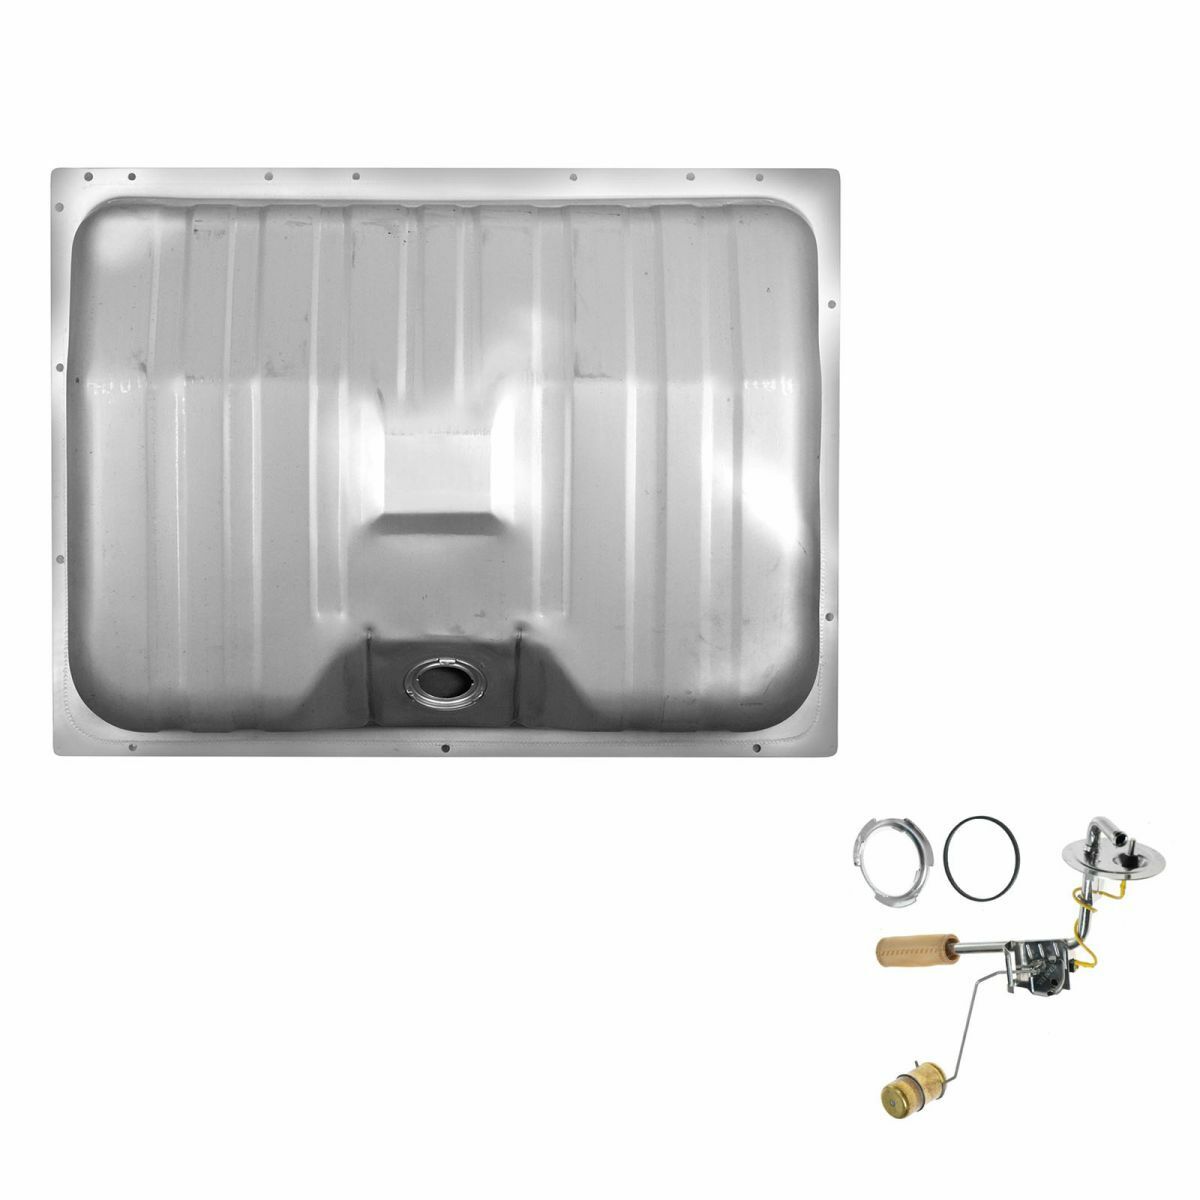 Fuel Gas Tank 16 Gallon with Sending Unit Kit for Ford Falcon Mercury Comet